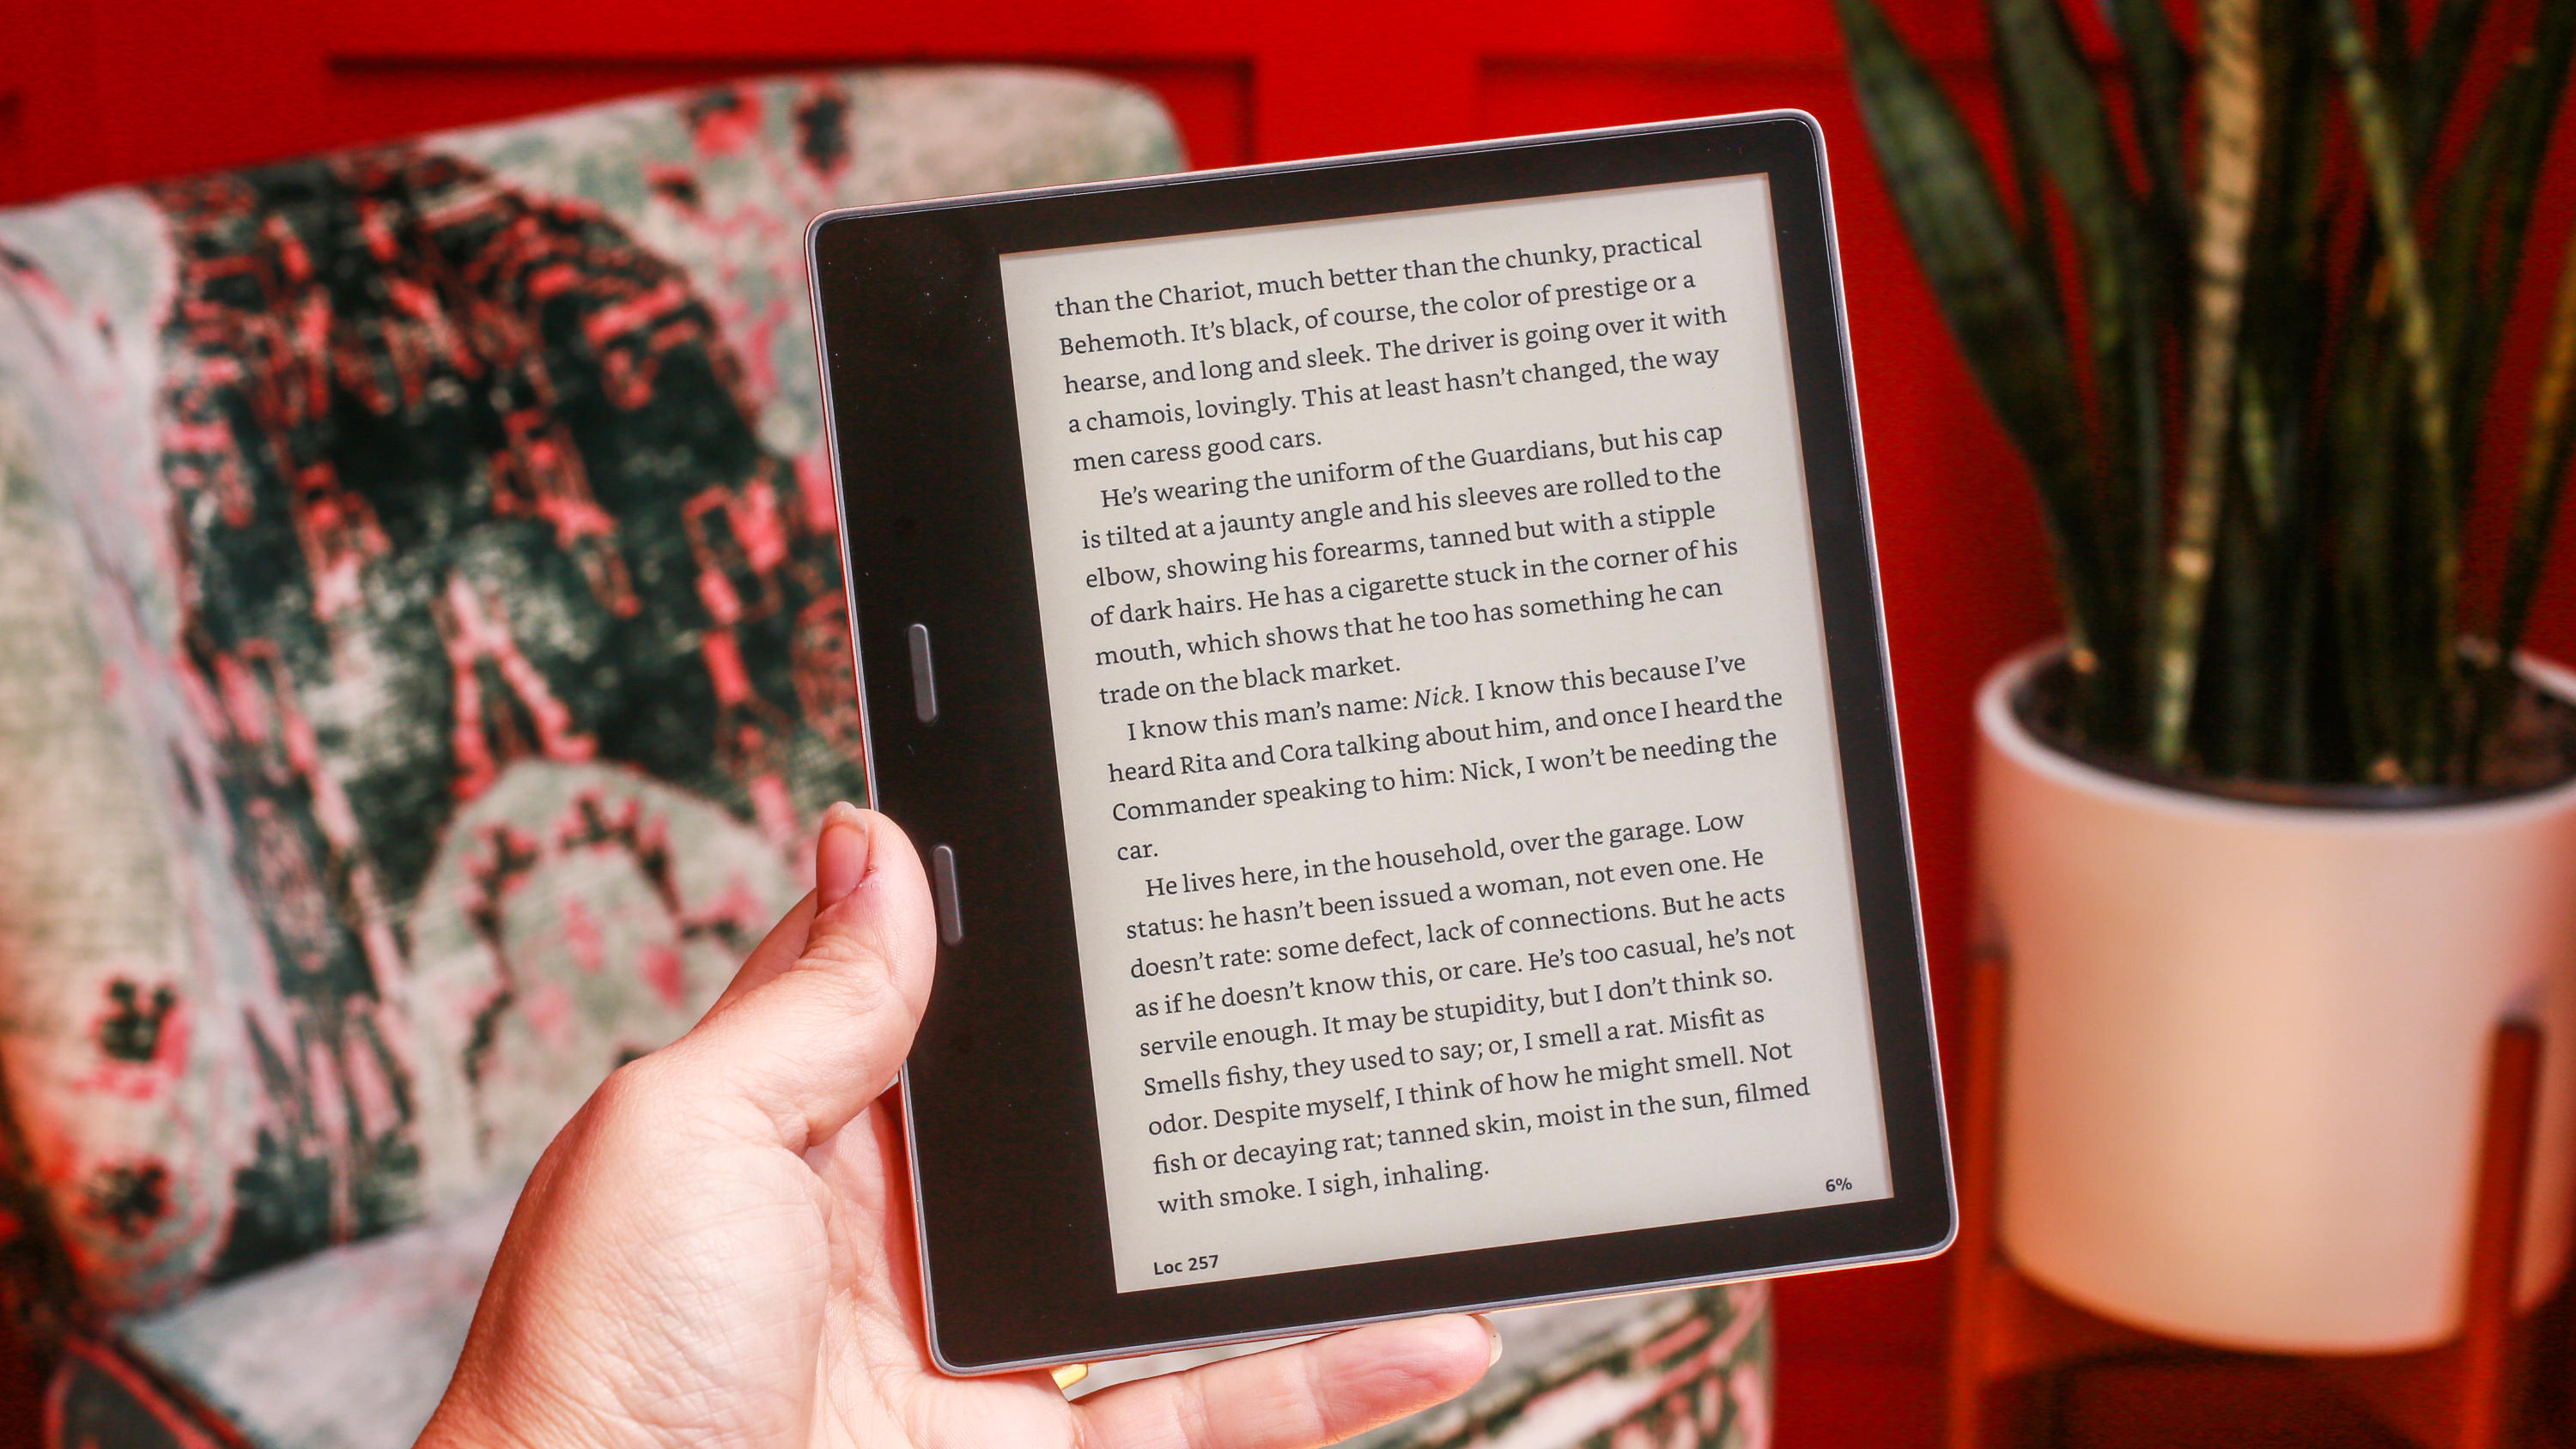 Kindle (2019) review: Cheapest Kindle is an illumination - CNET